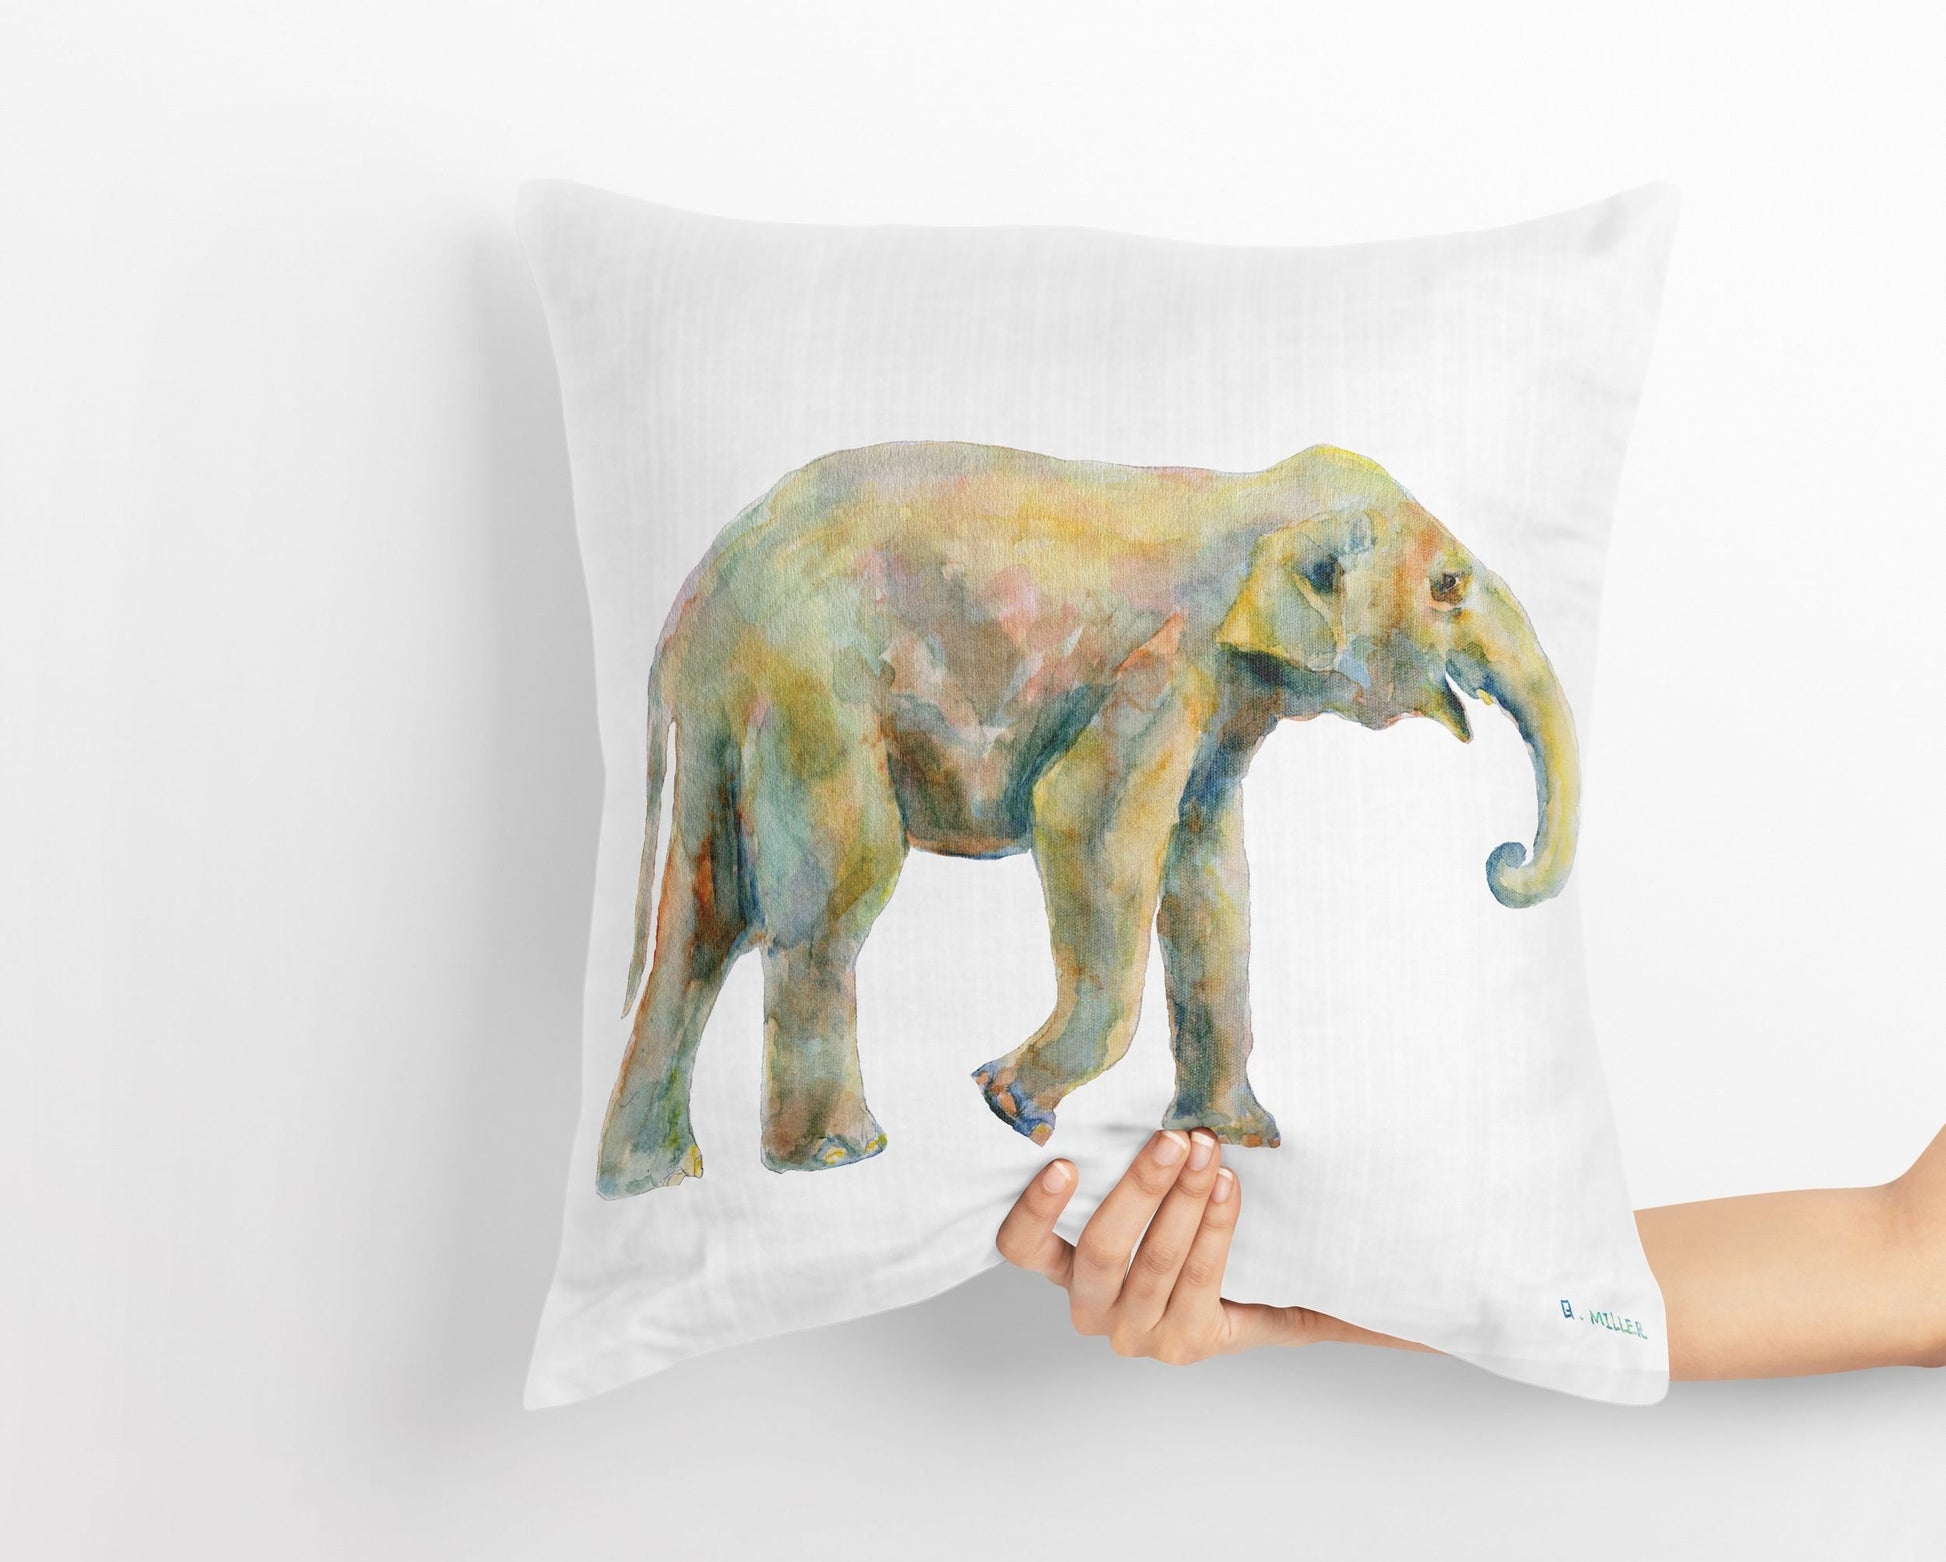 Baby Elephant Cute Pillow Cases, Pillow Cases For Kids, Animal Pillow, Art Pillow, Green Pillow Cases, Watercolor Pillow Cases